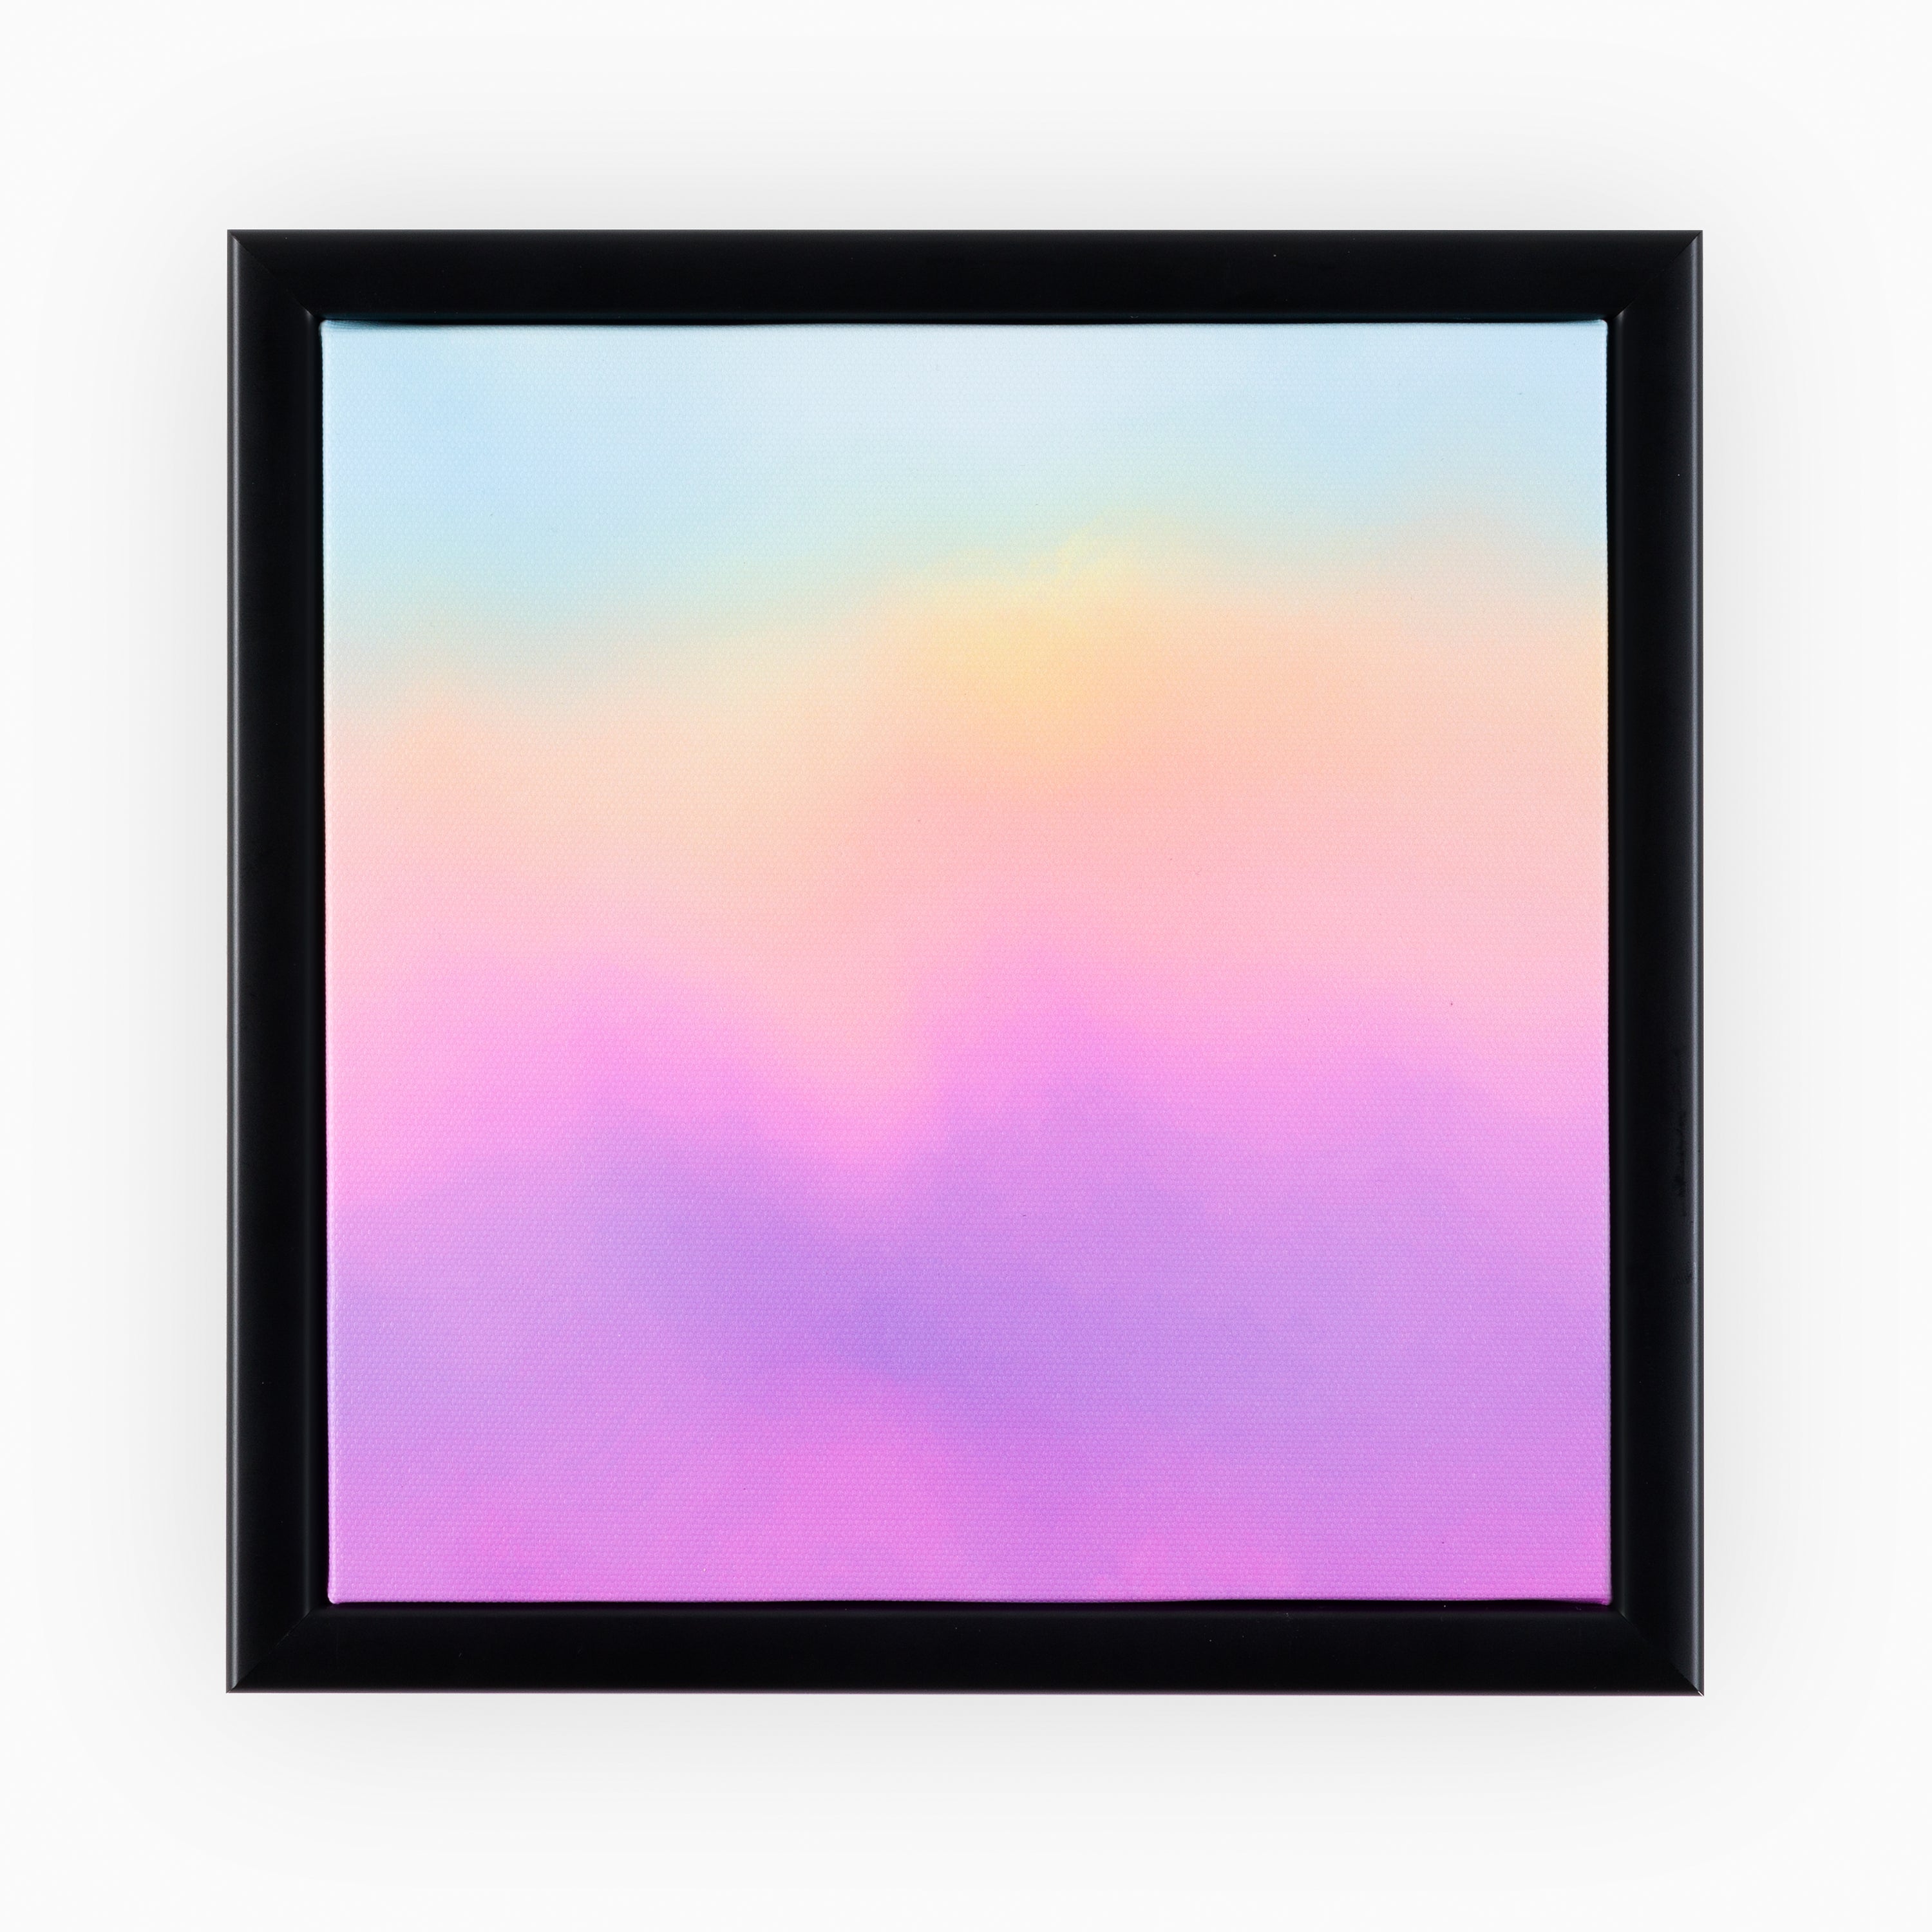 Luxury abstract canvas artwork in a sleek black frame, featuring a soft blended gradient of pastel pink, purple, yellow and blue hues.